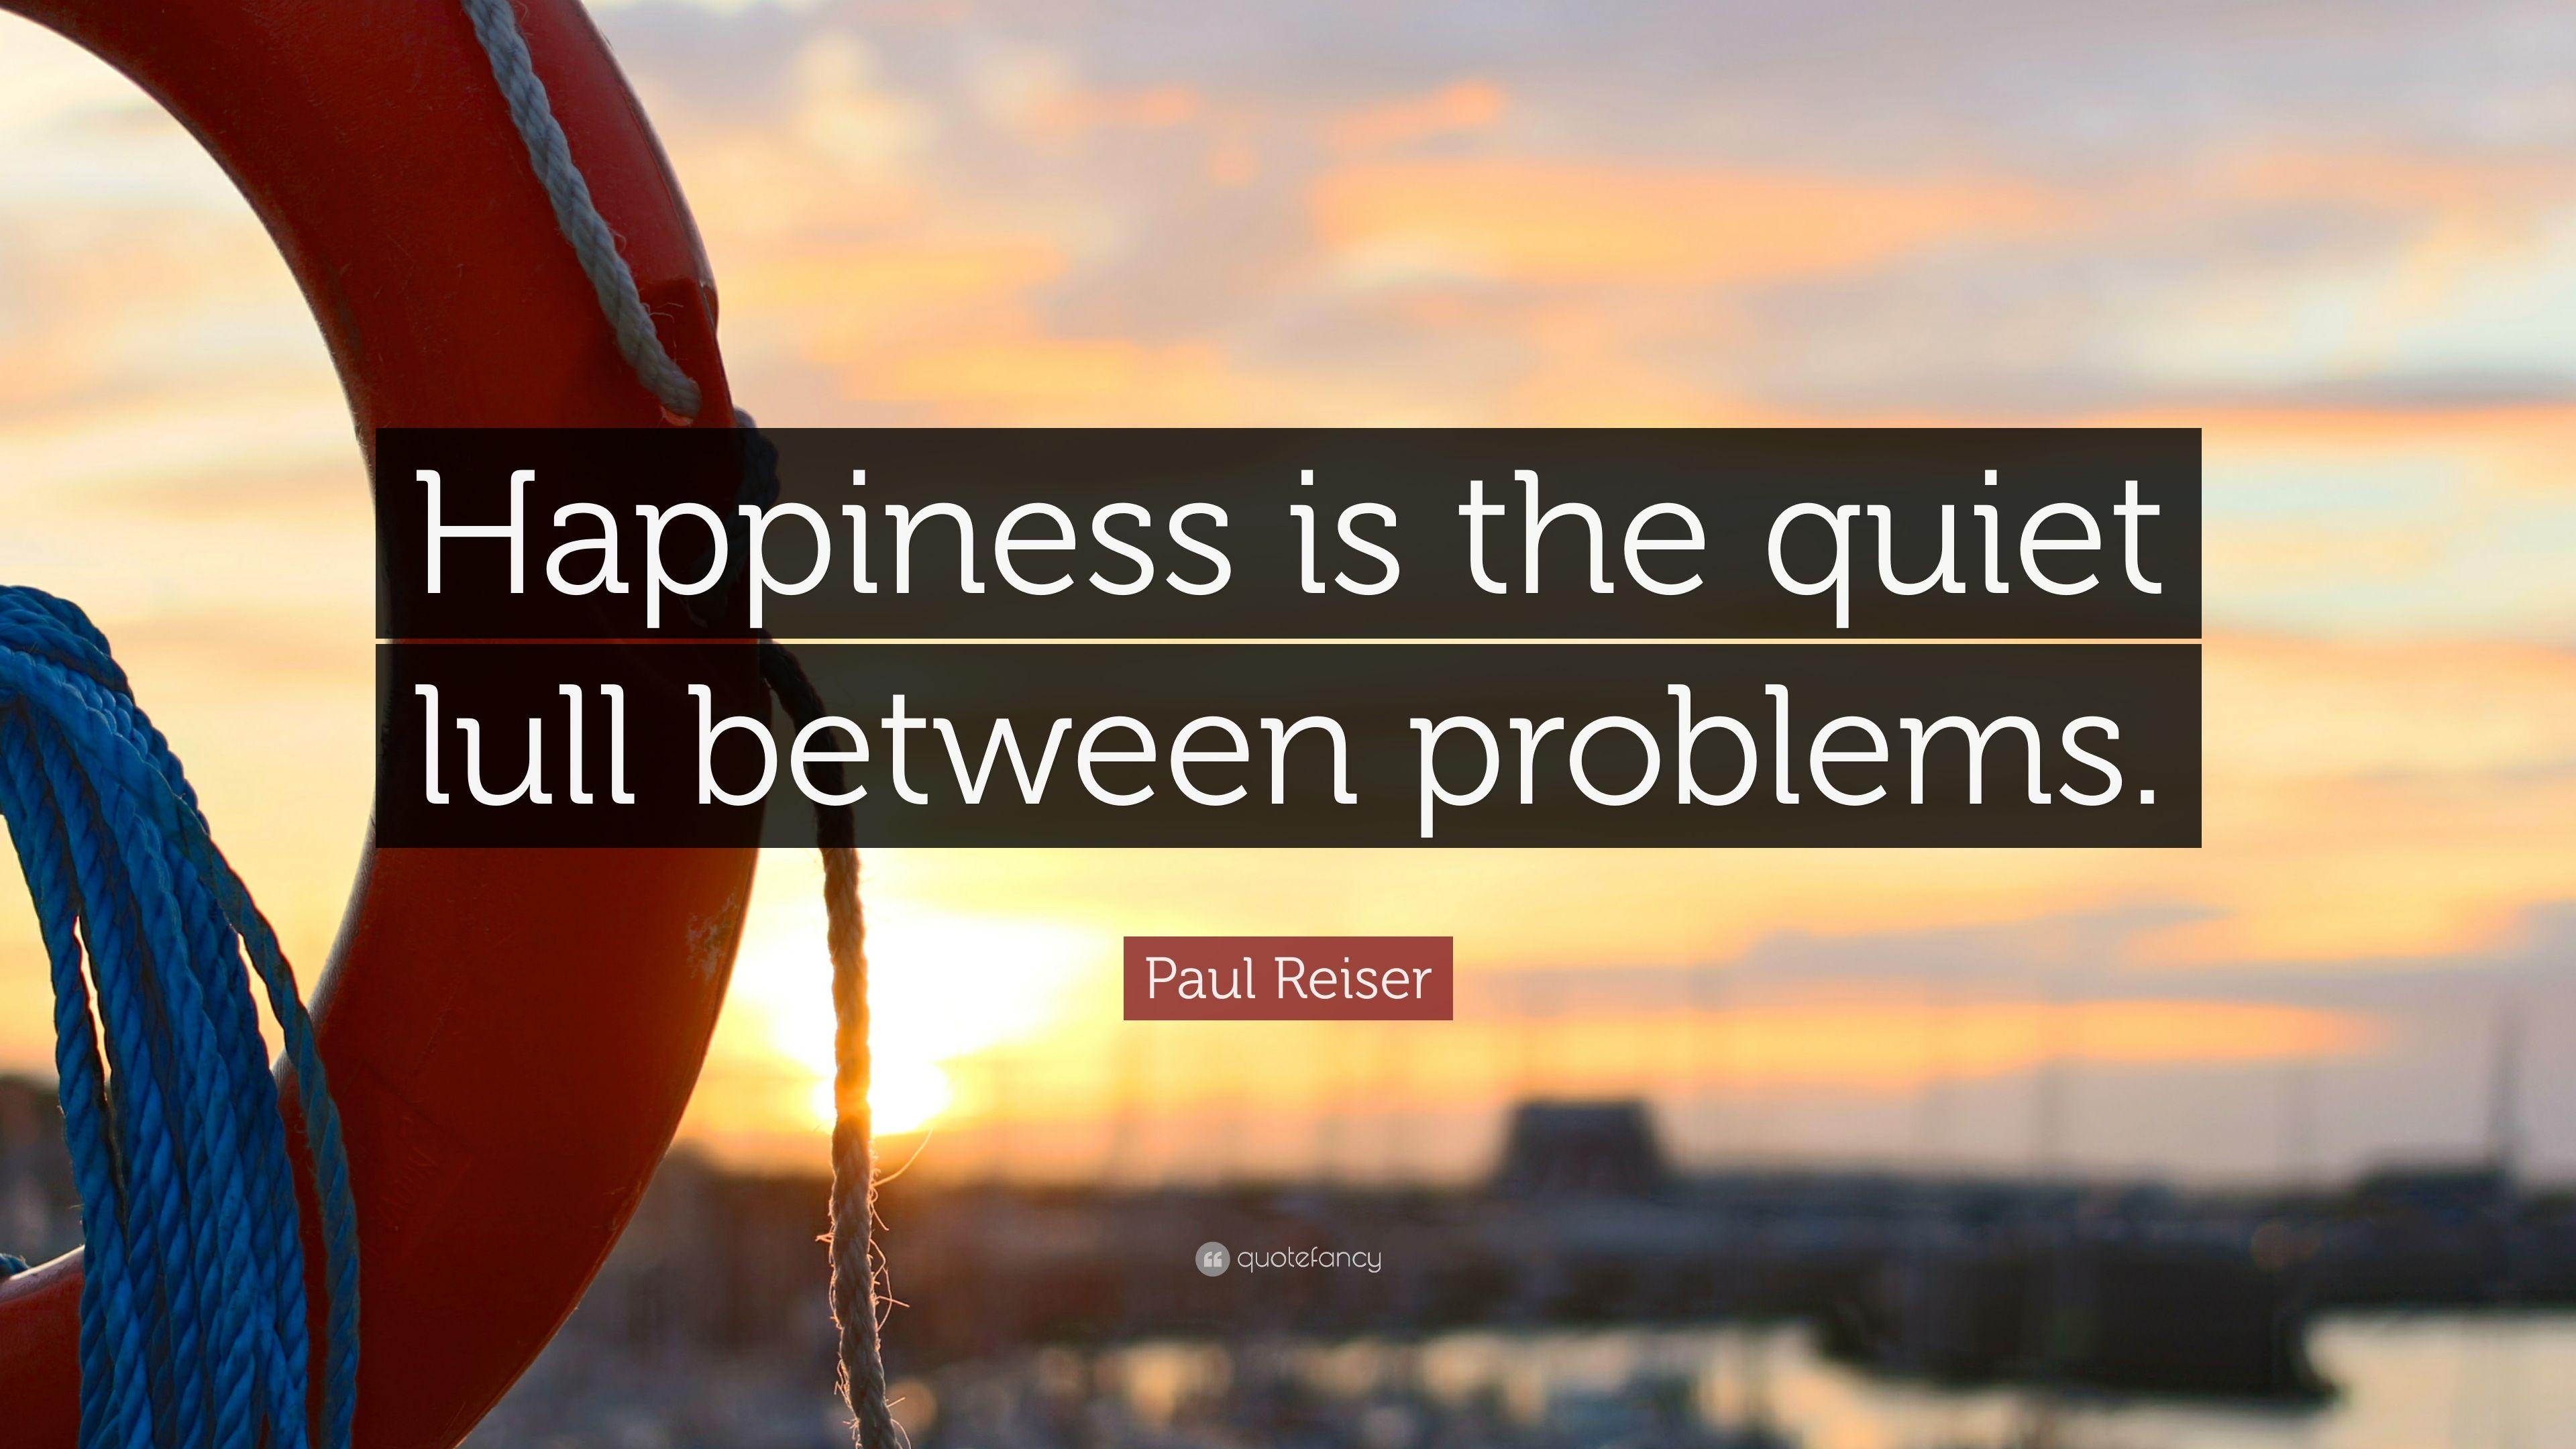 Paul Reiser Quote: “Happiness is the quiet lull between problems